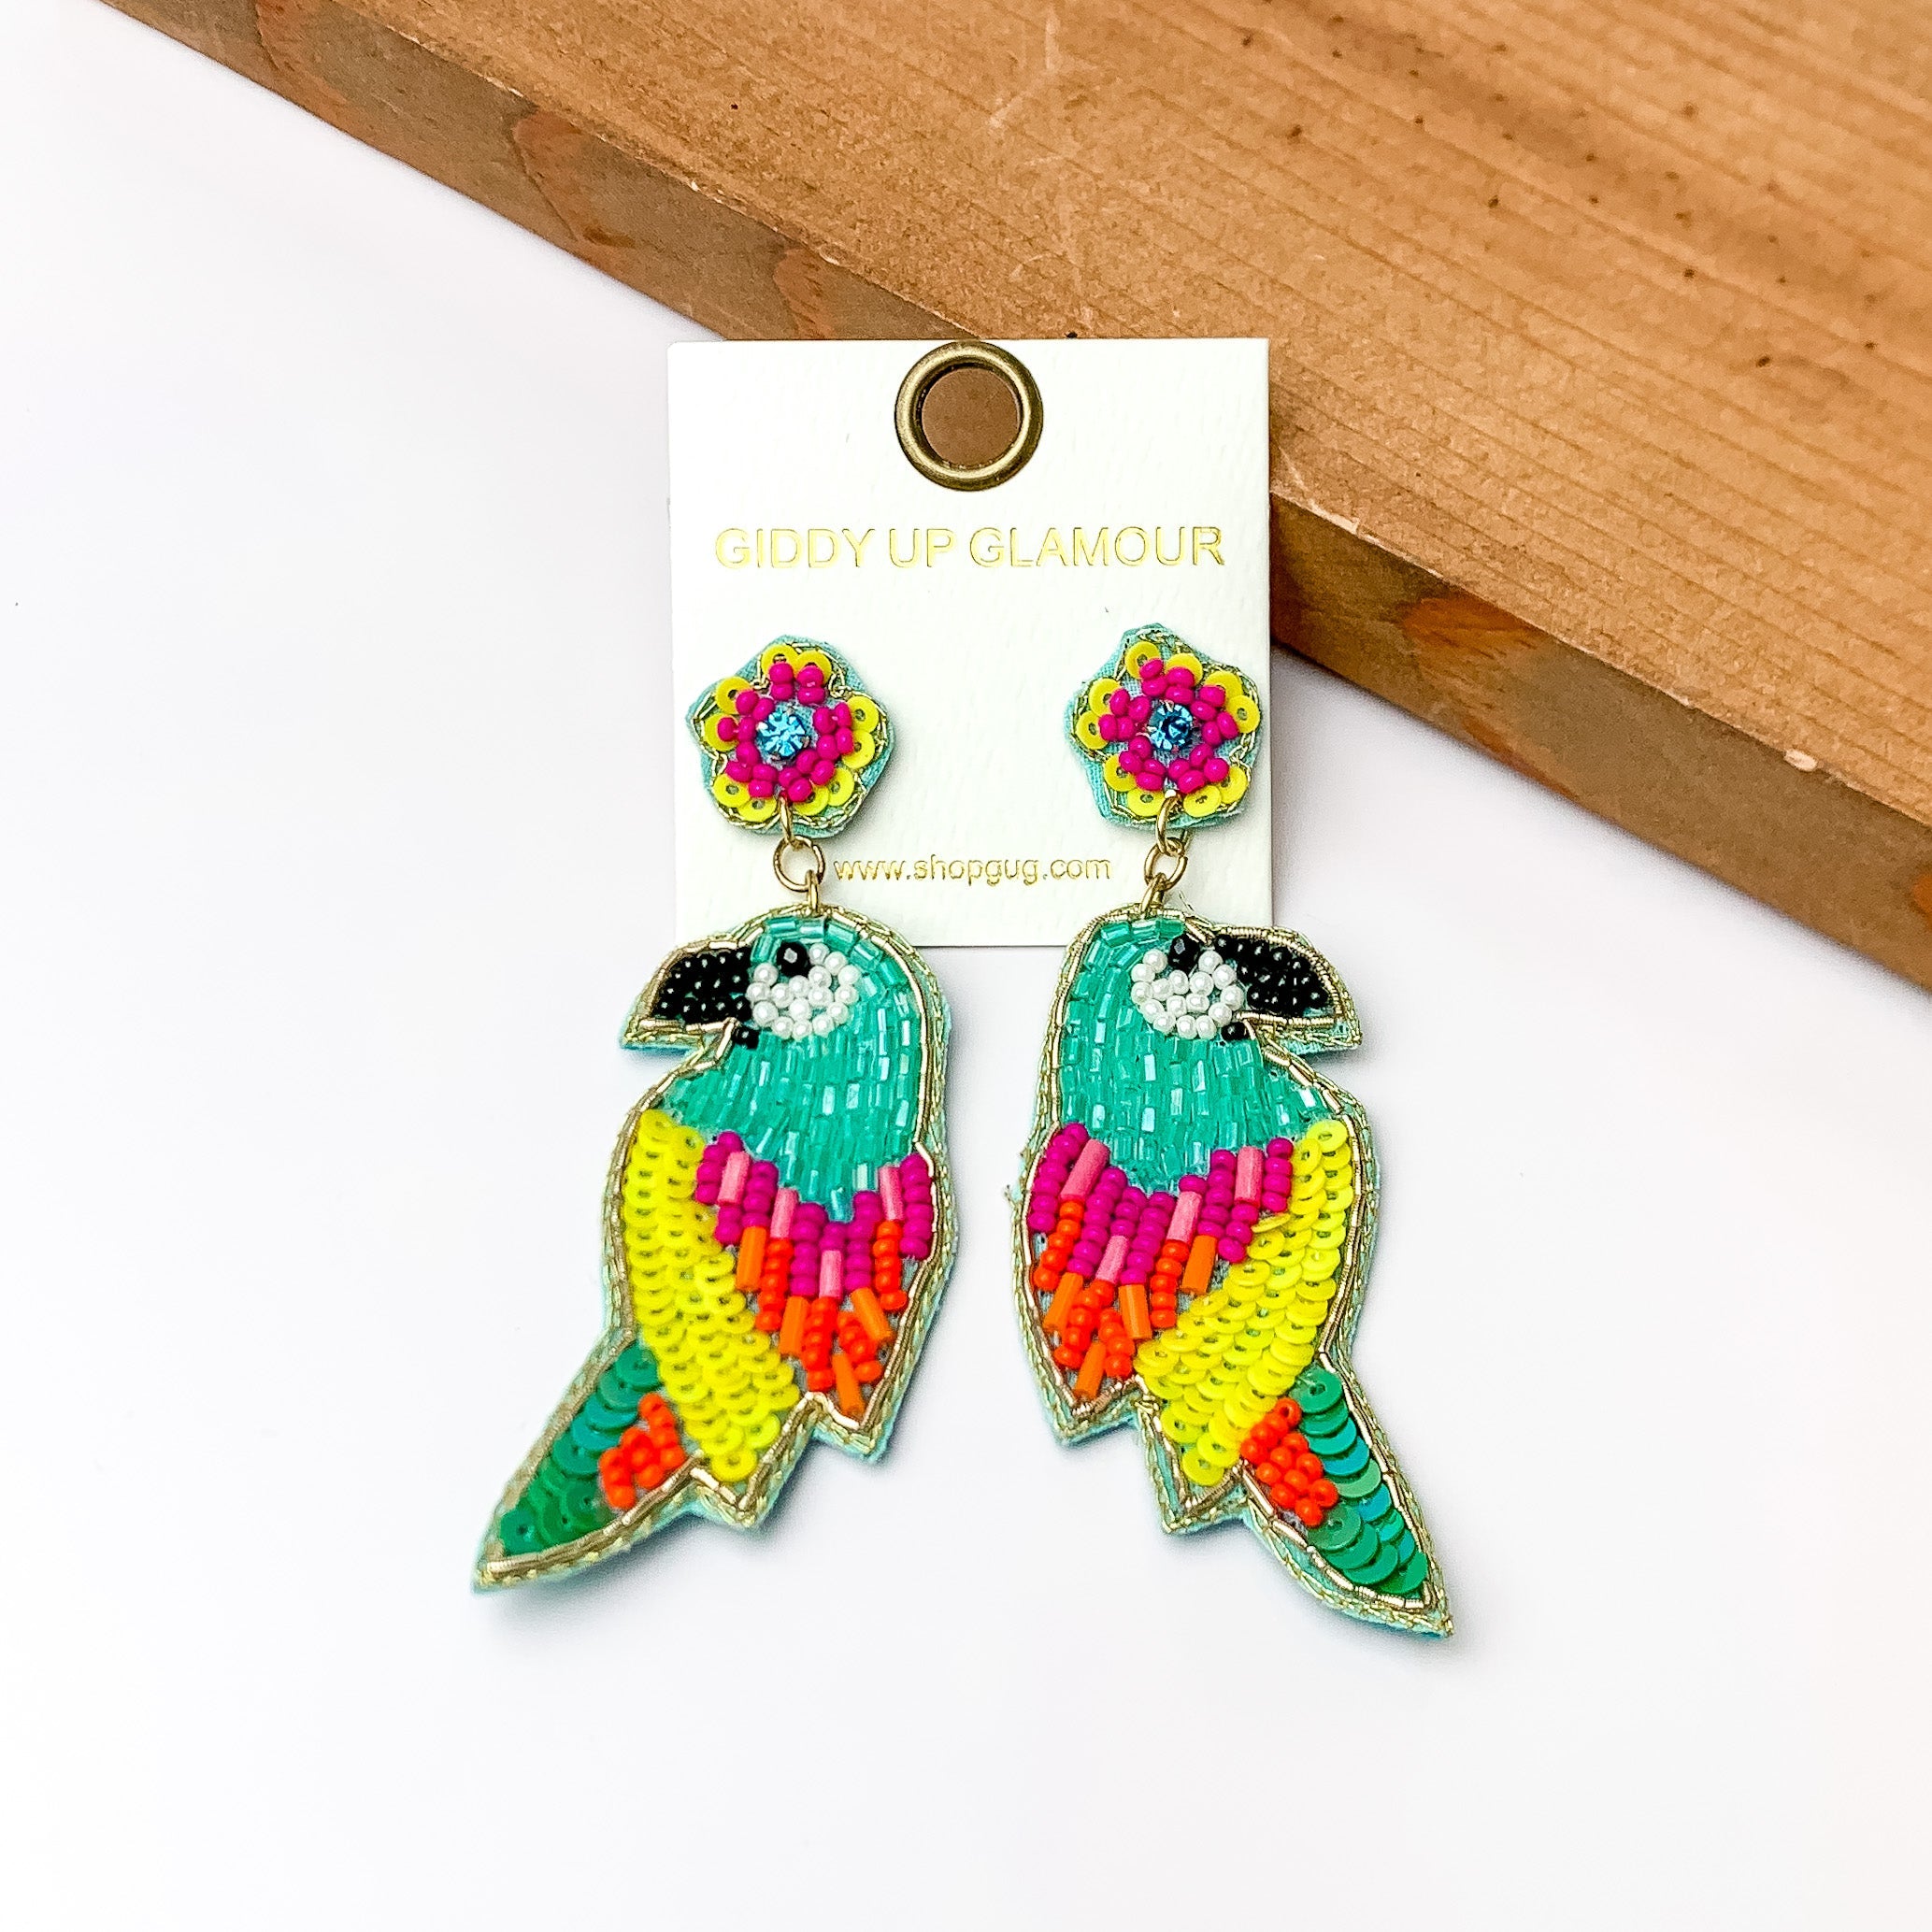 These parrot earrings are turquoise with beads that are yellow, fush, and orange. They do have seqence that are neon yellow and dark turquoise. These earrings are pictured in front of a piece of wood with a white background.